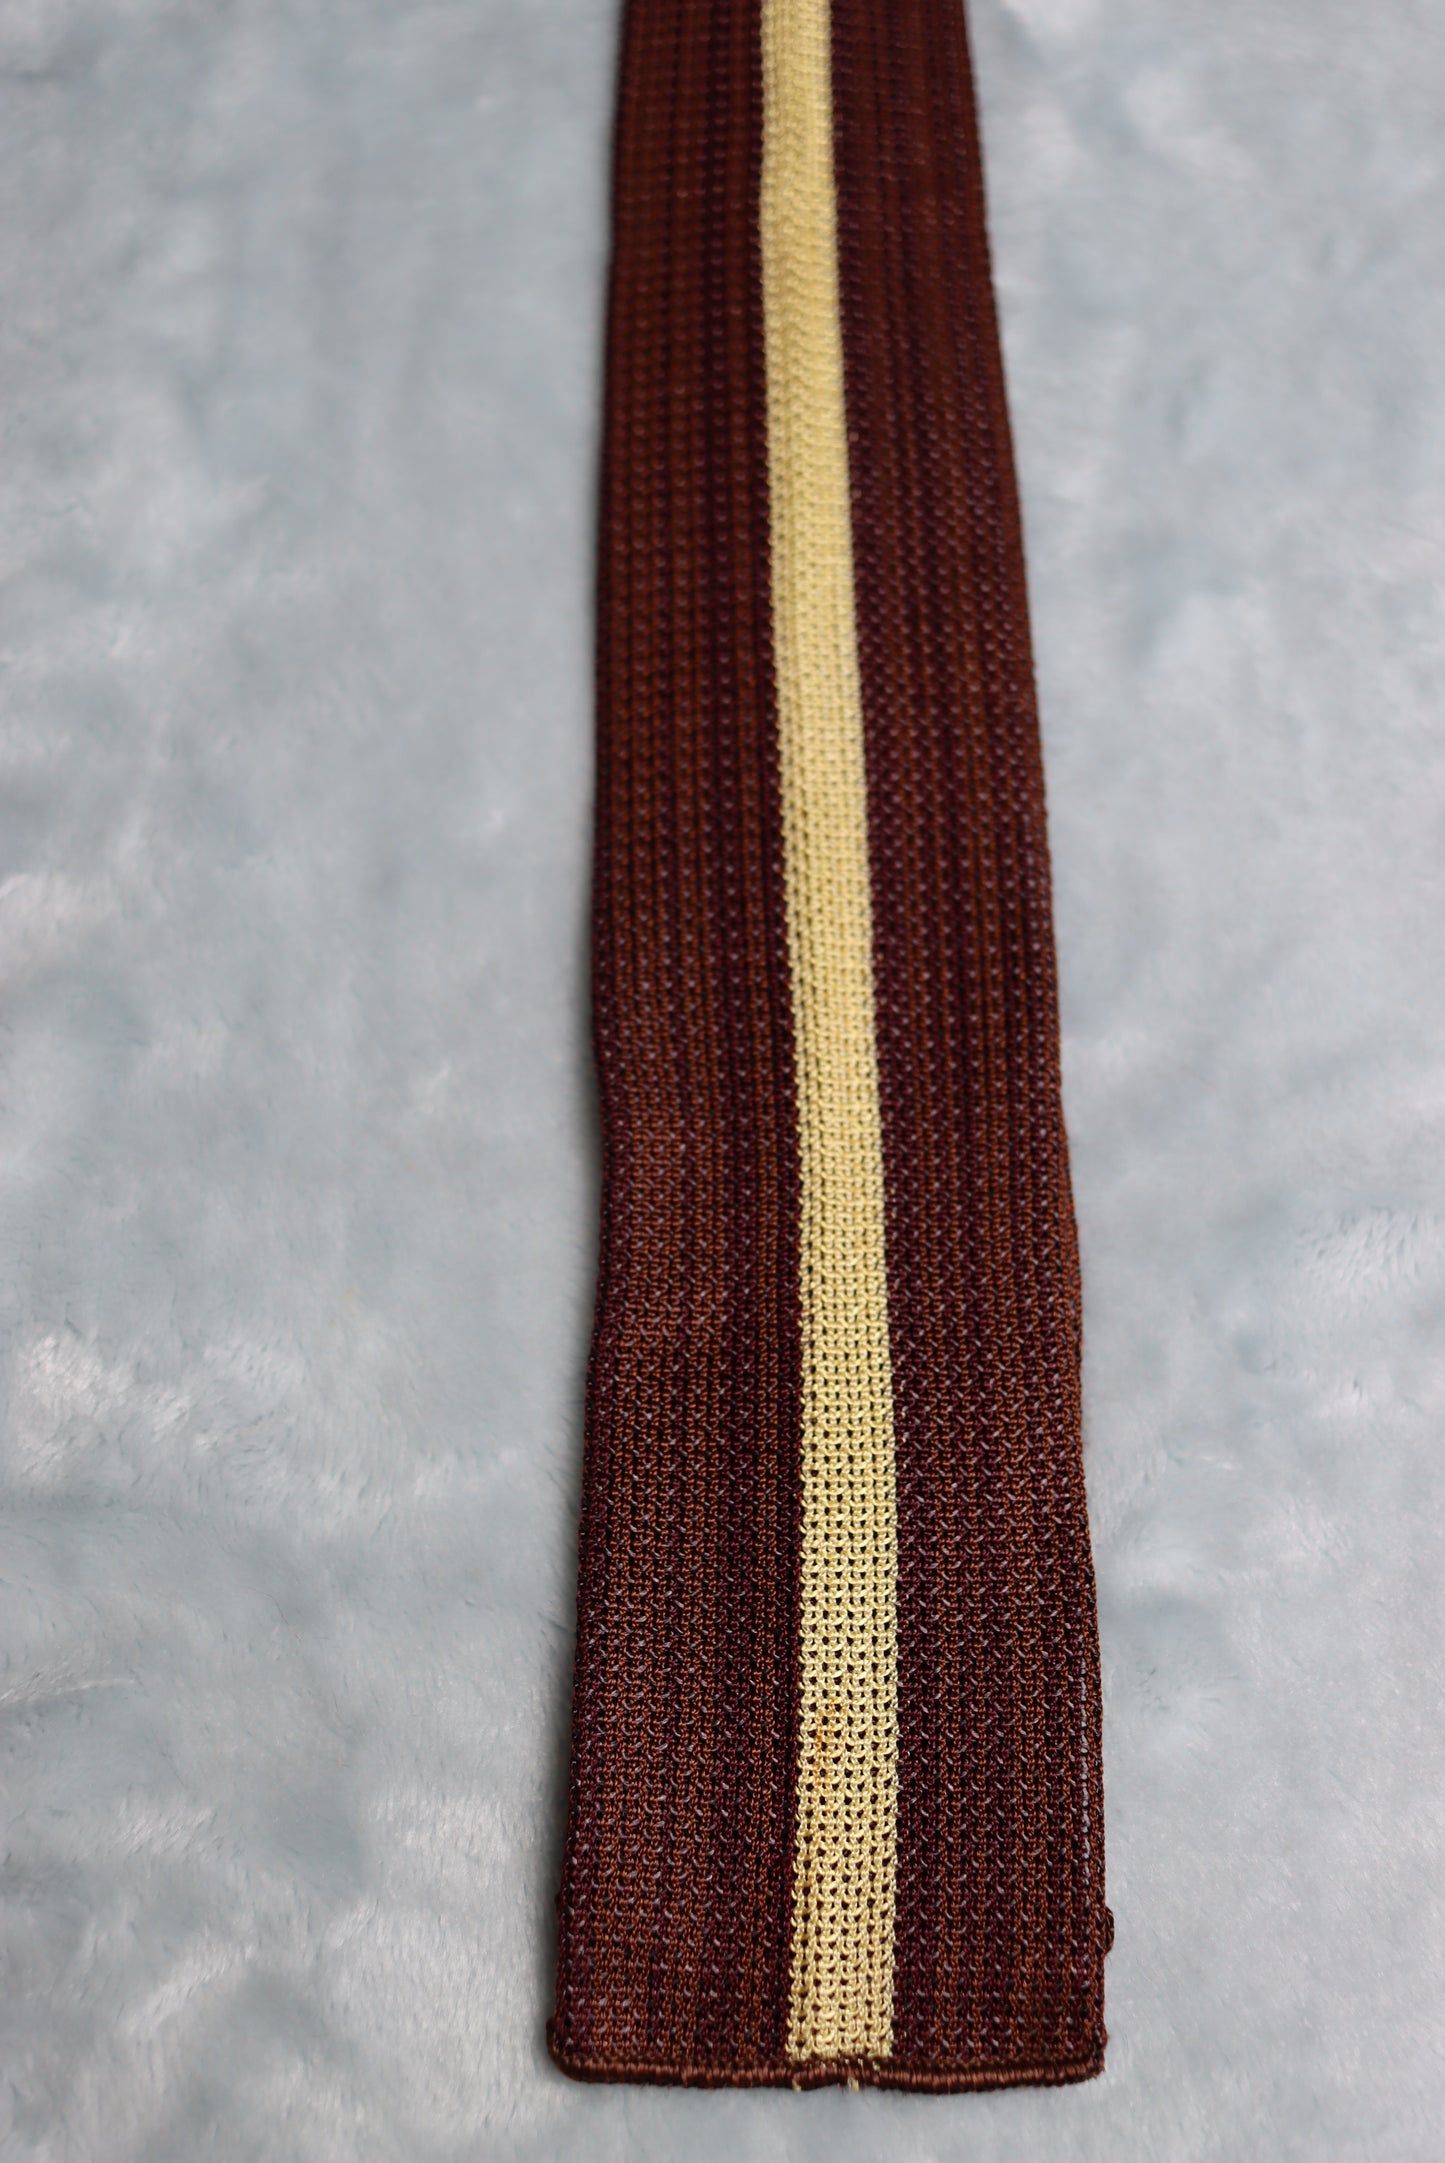 Vintage 1940s/50s Knitted Fabric Straight Short Tie